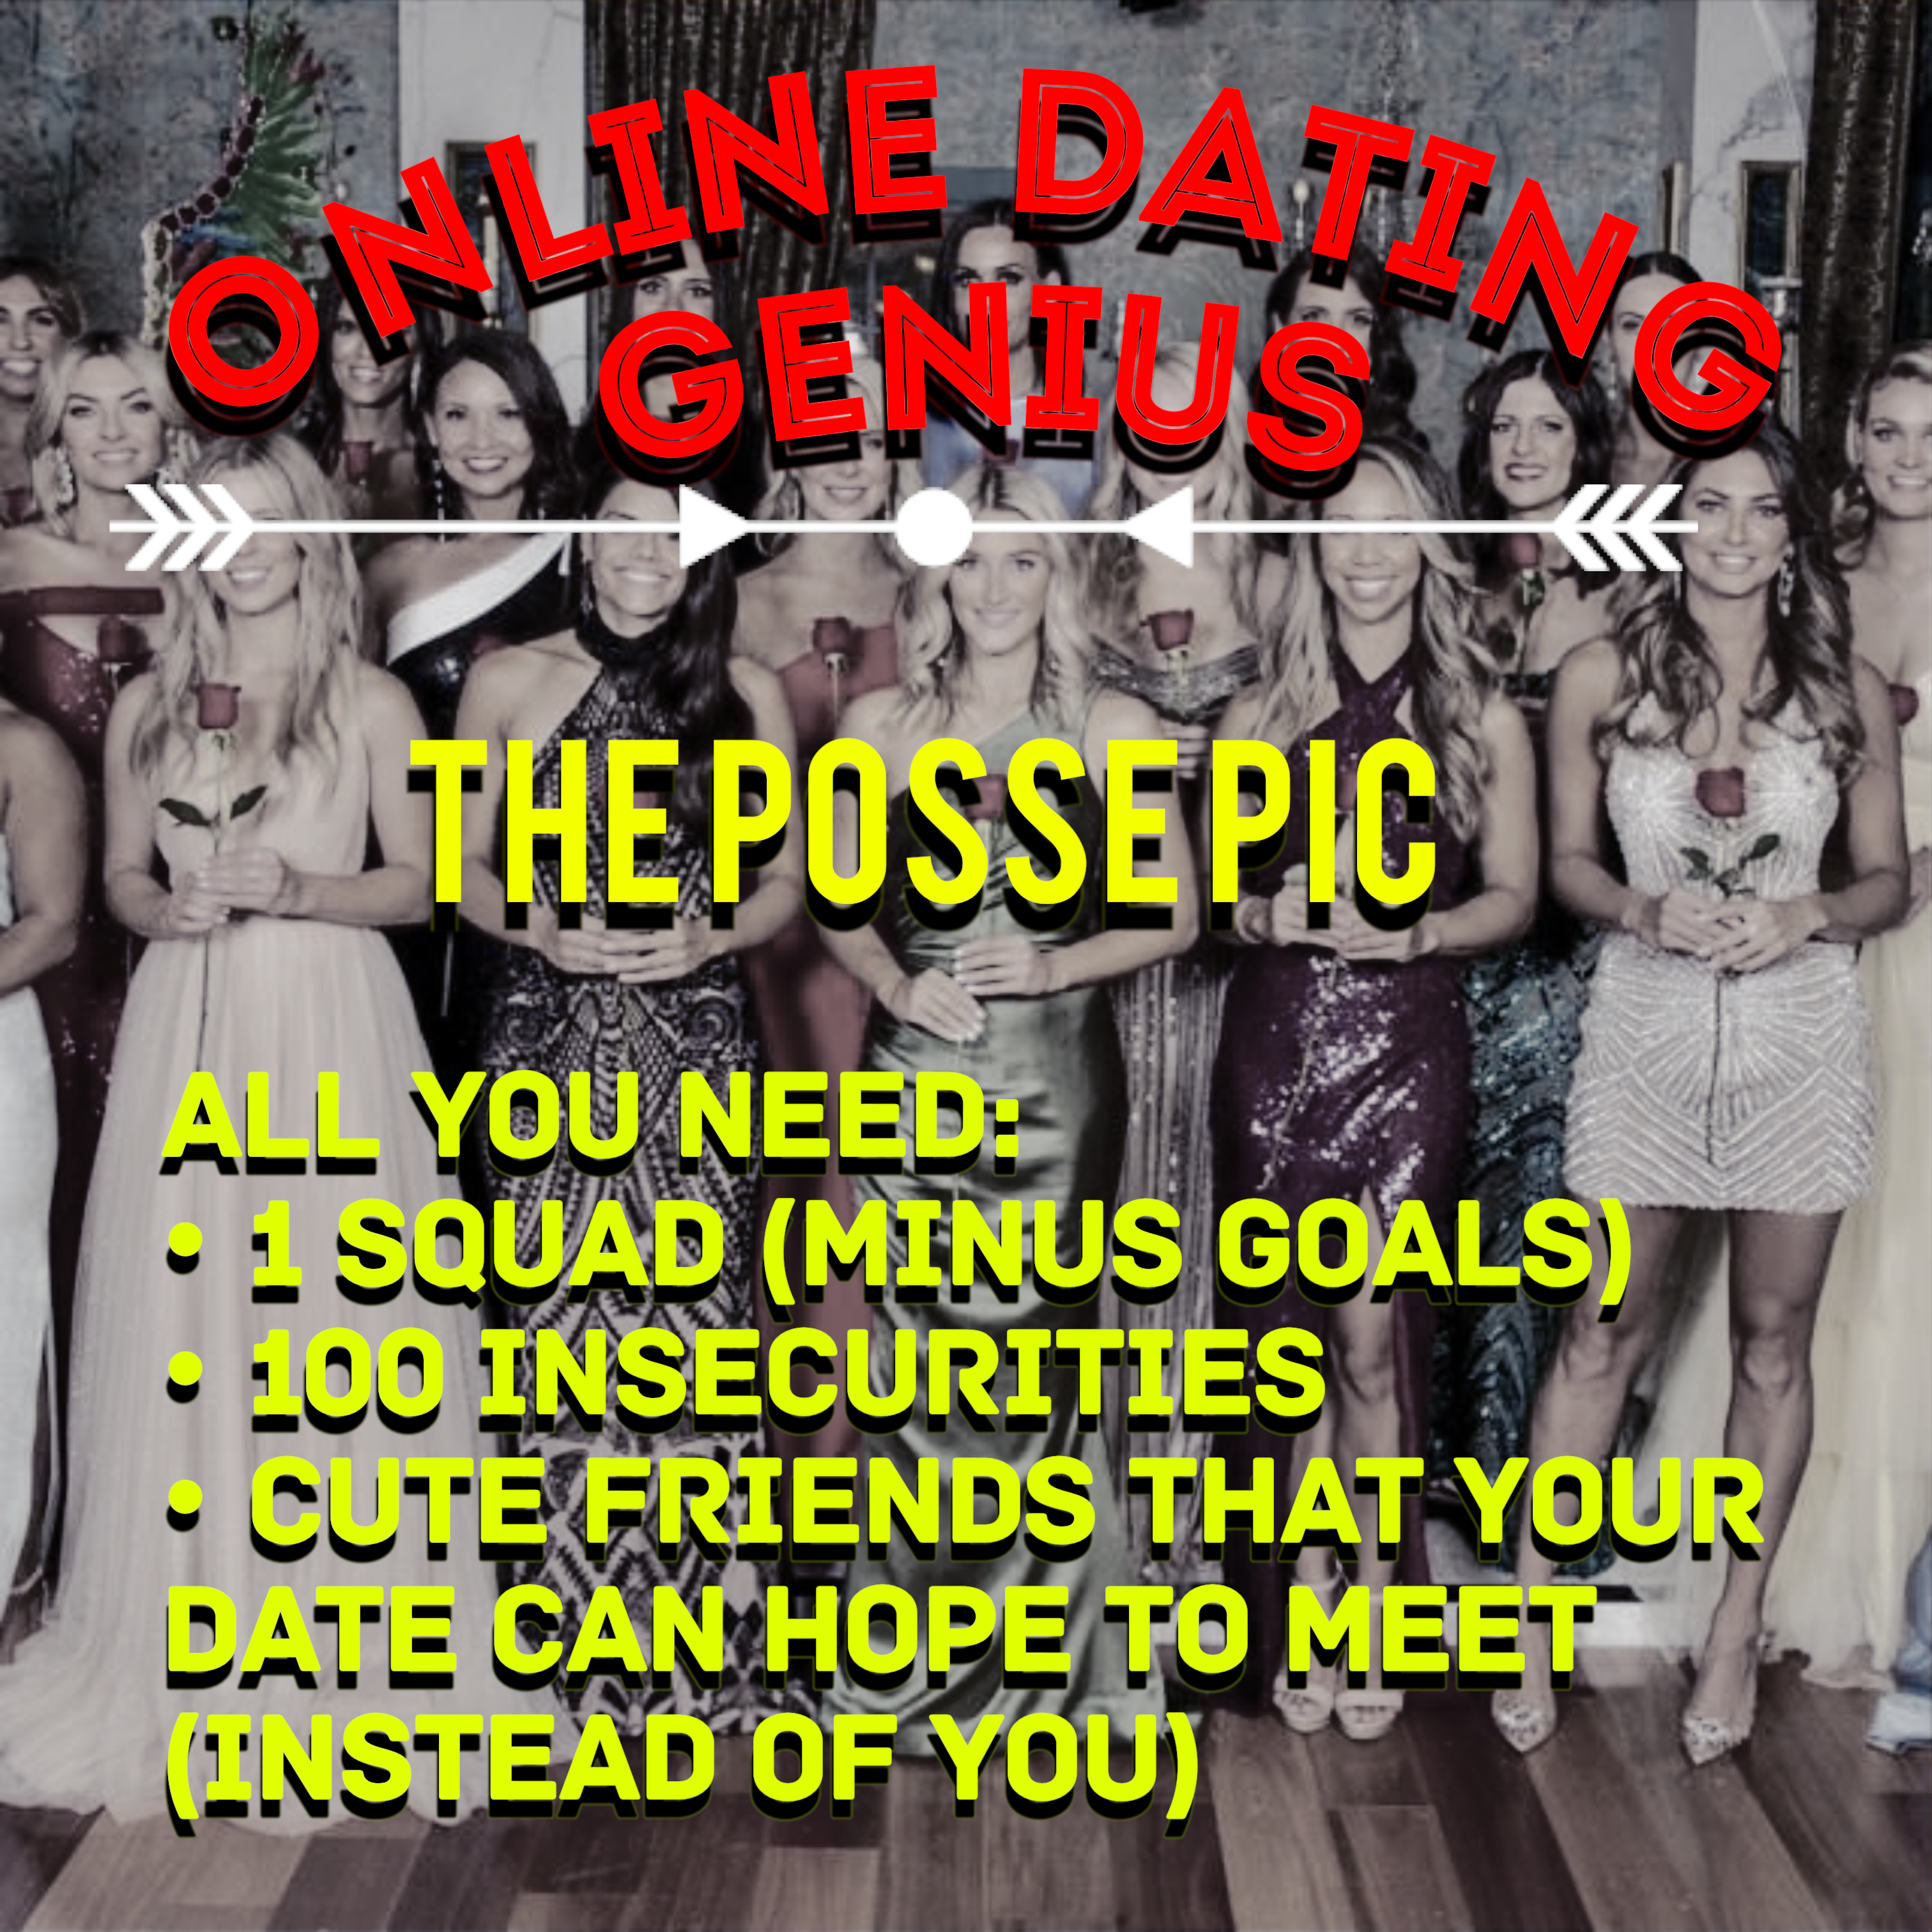 Online Dating Profile Tip: Lose the group photo